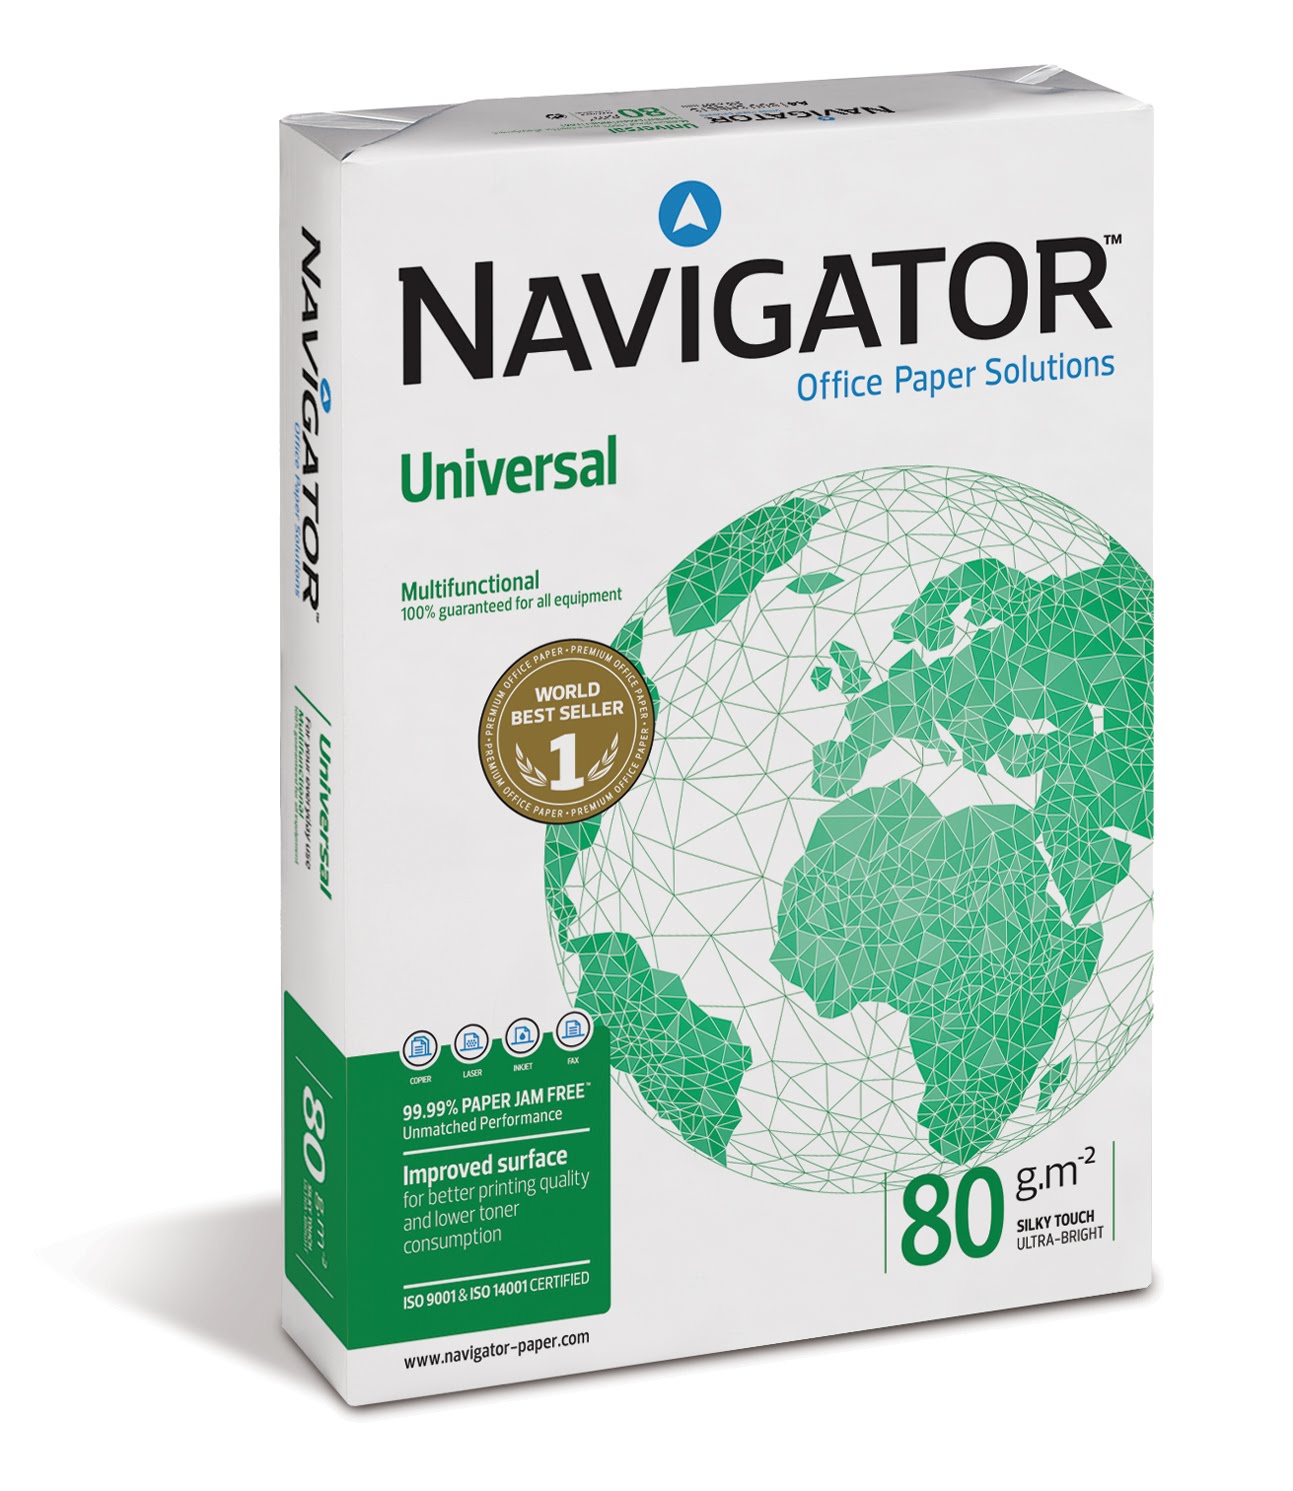 Your Paper Blog: Navigator unveils new image at Paperworld!